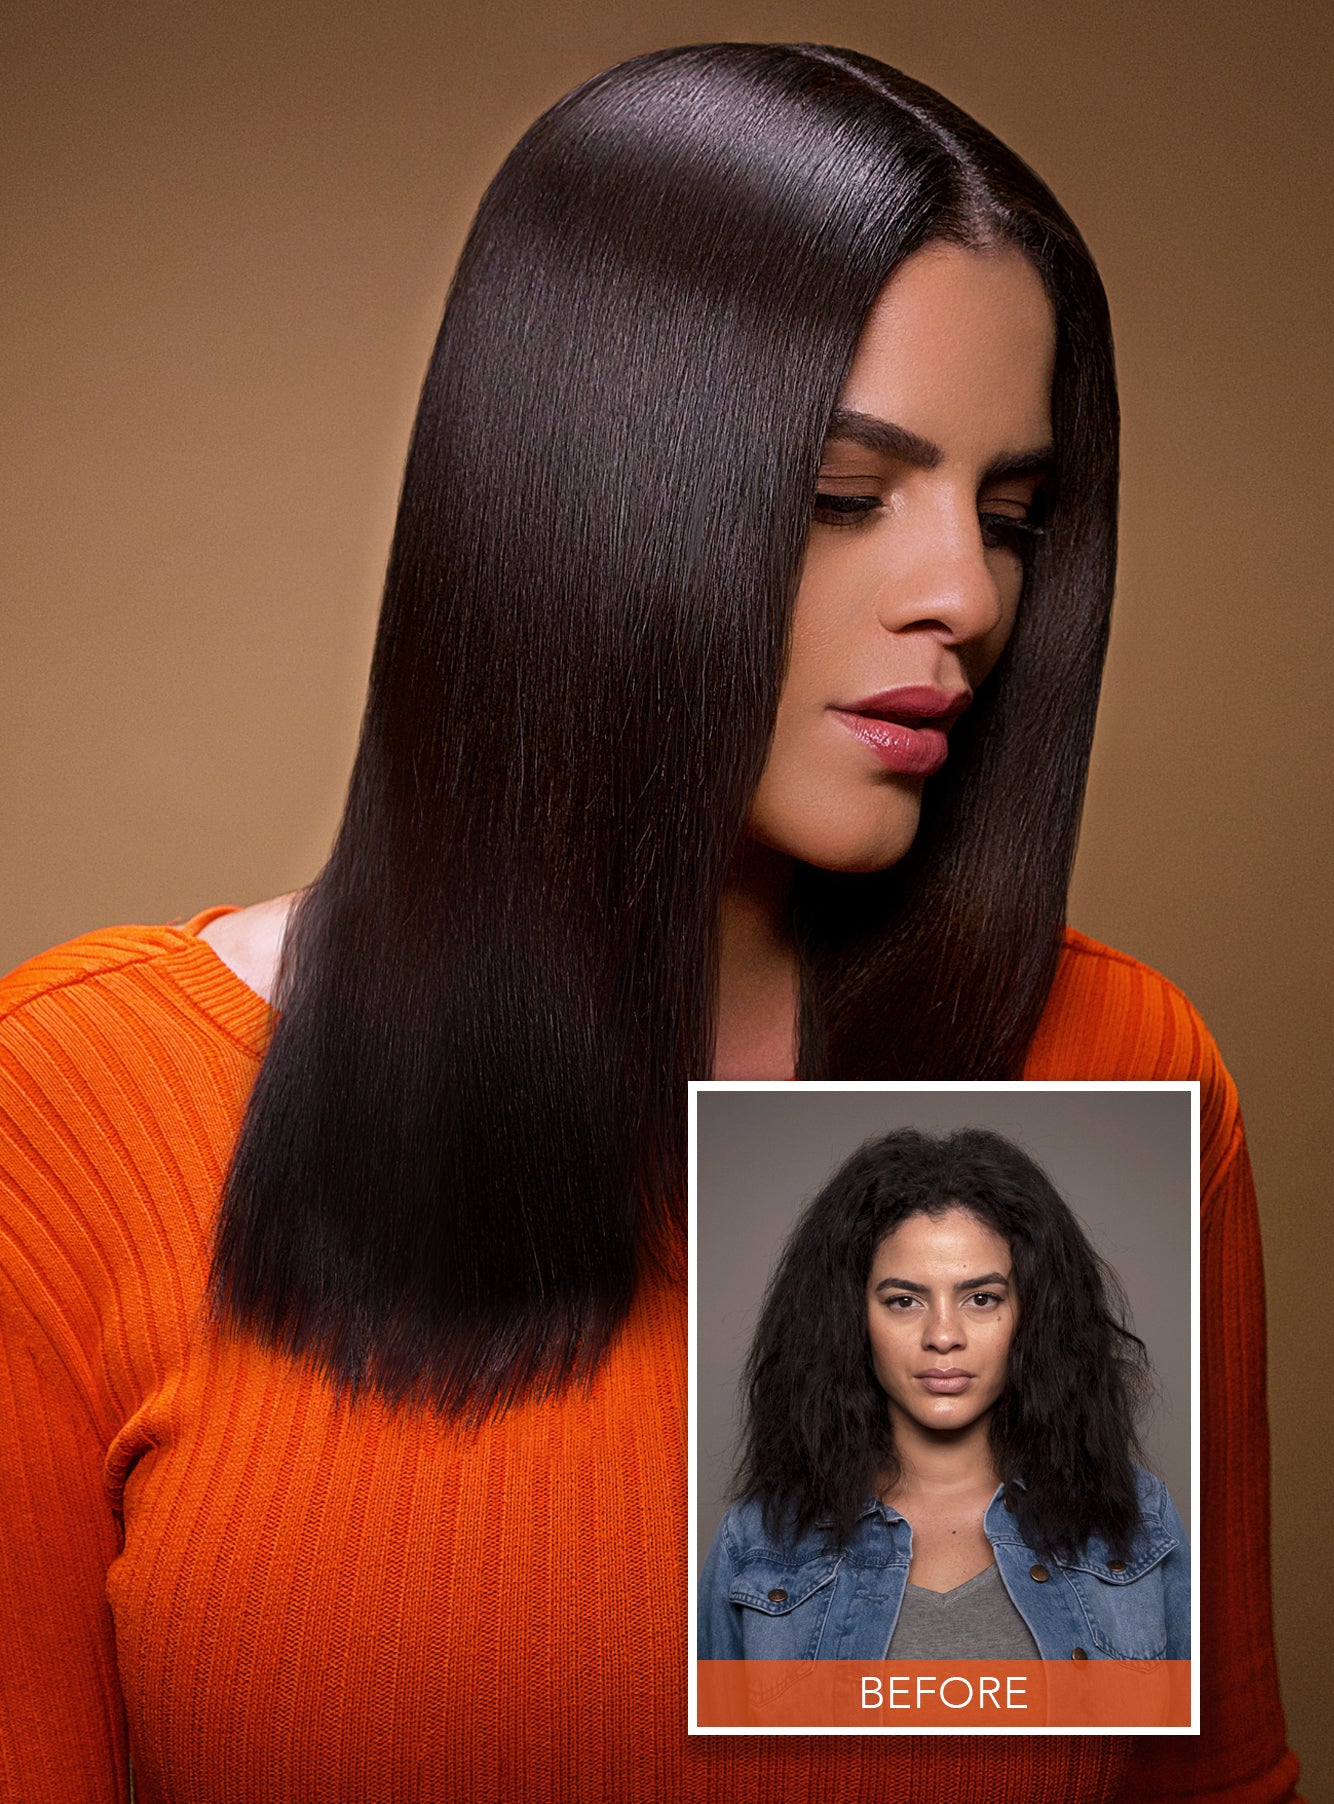 beautiful medium length, black, shiny hair young woman and smaller before picture with messy, unhealthy hair